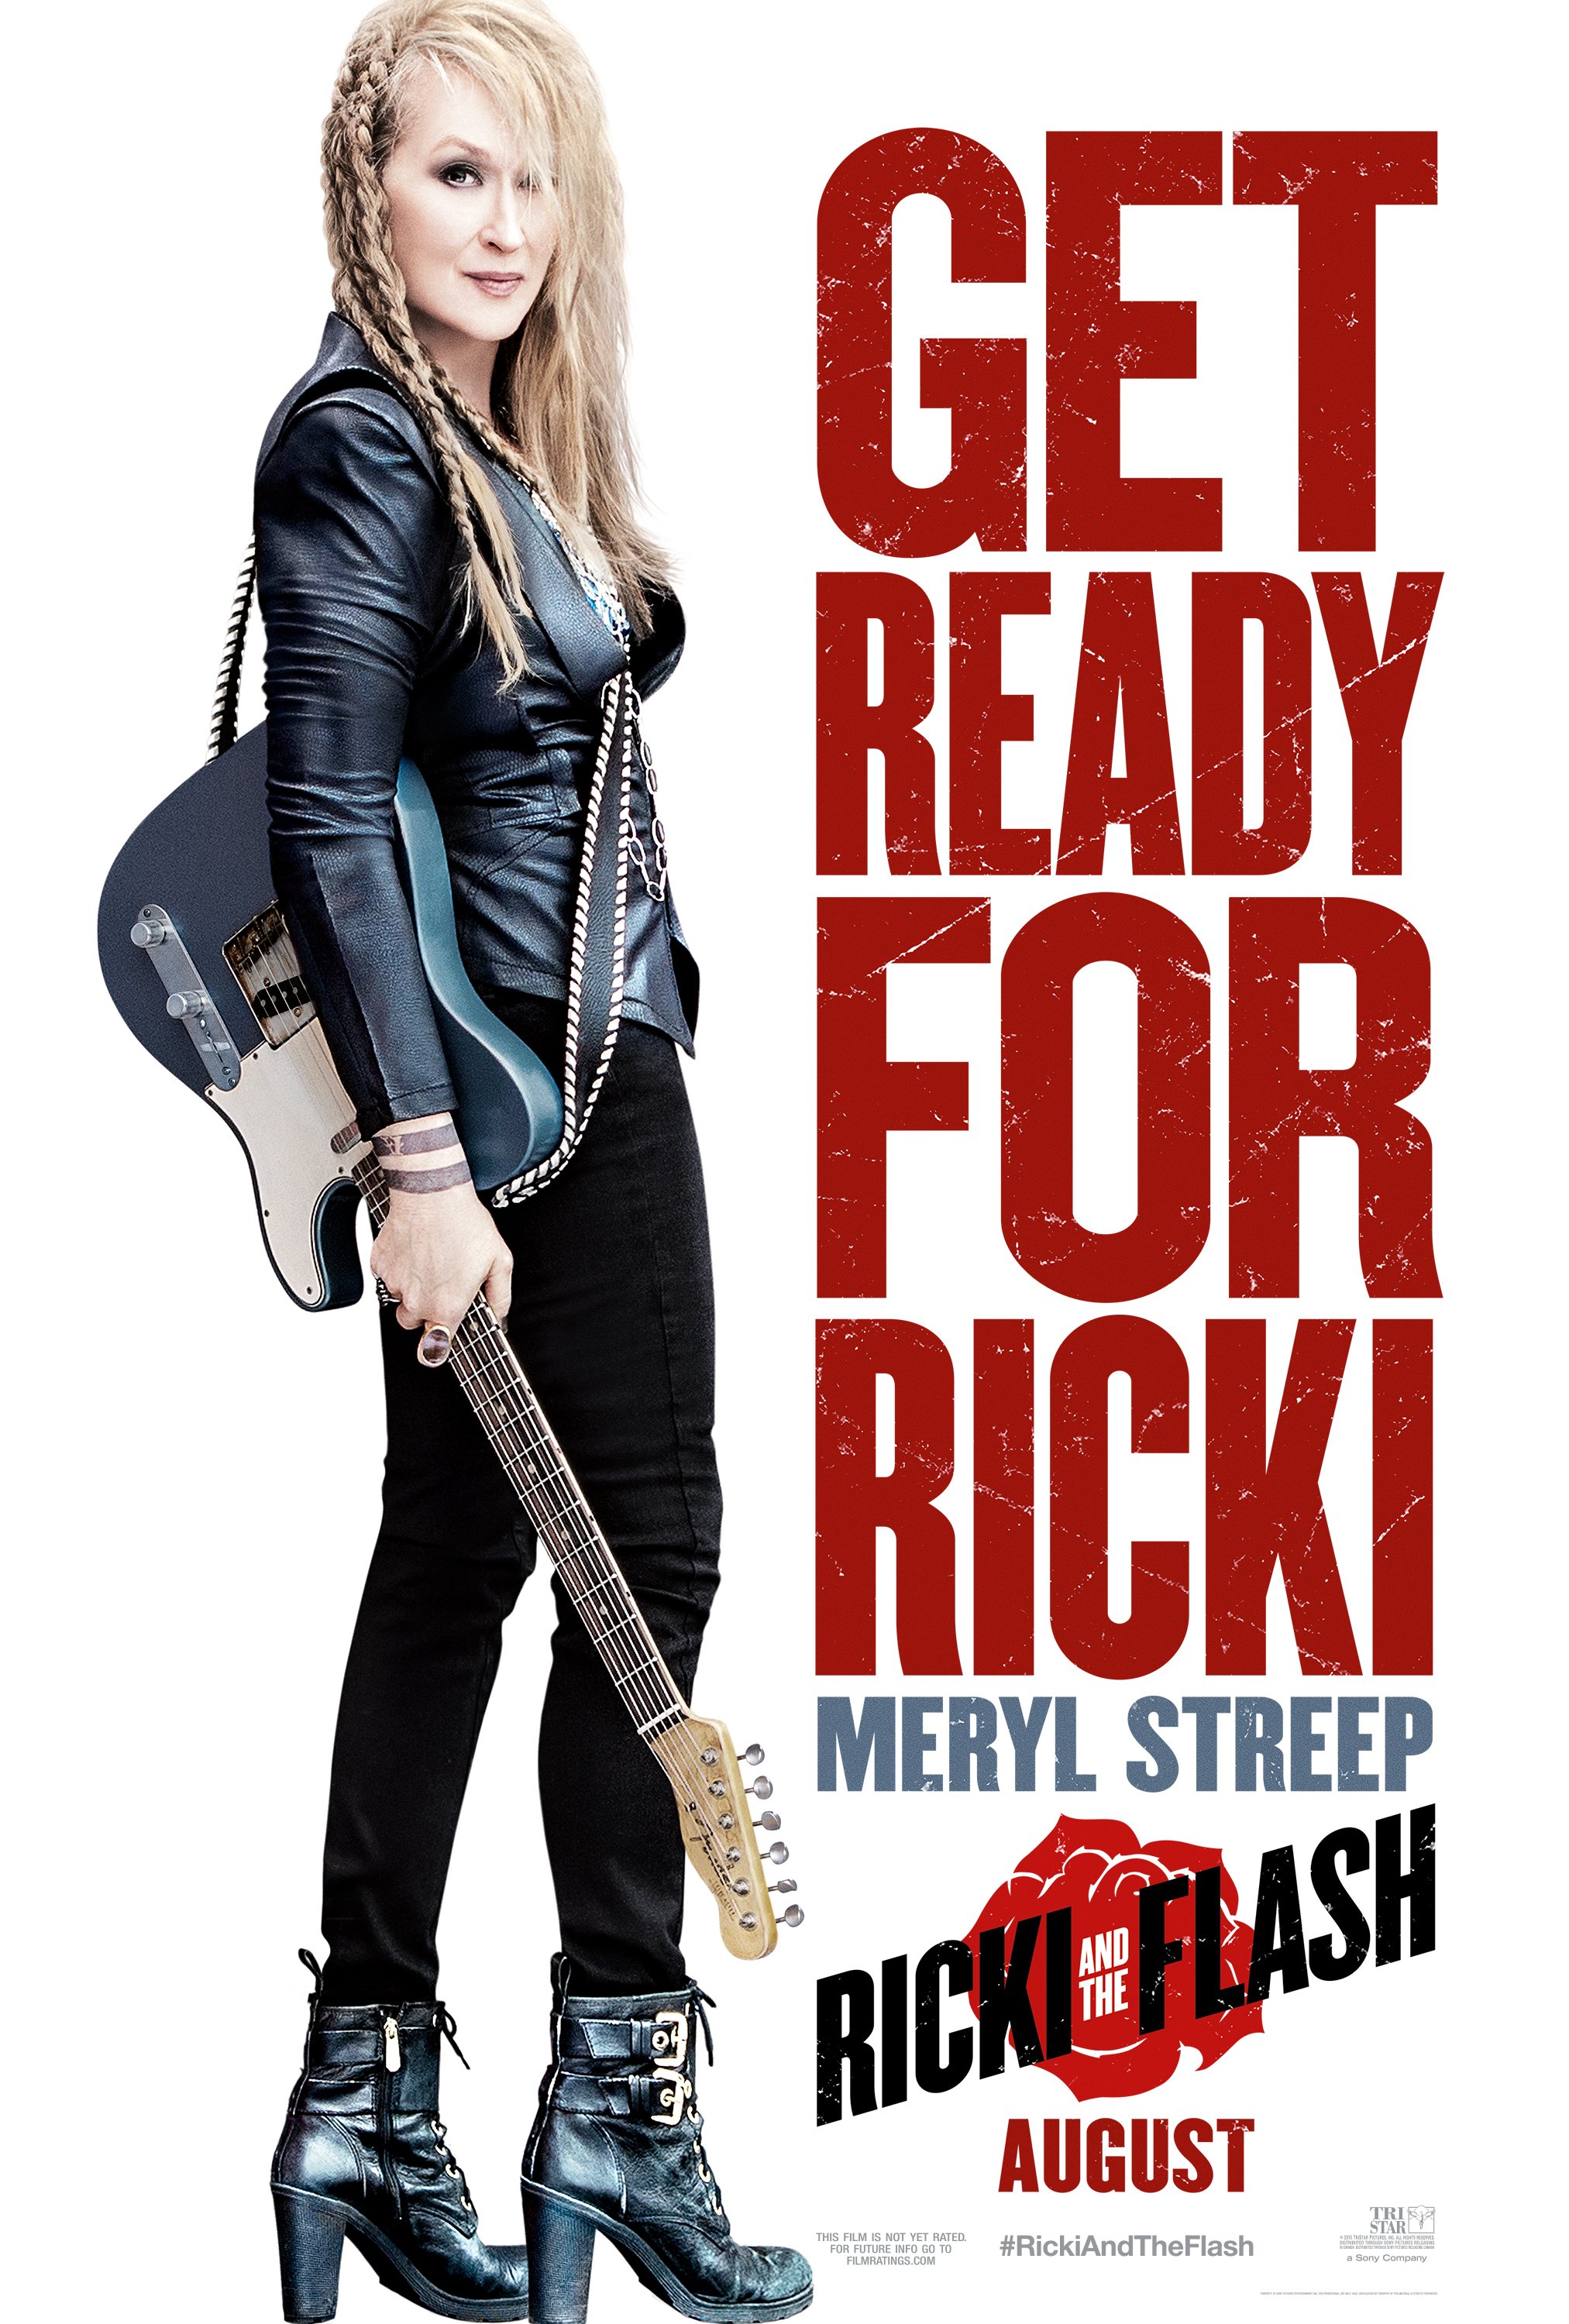 Poster of the movie Ricki and the Flash